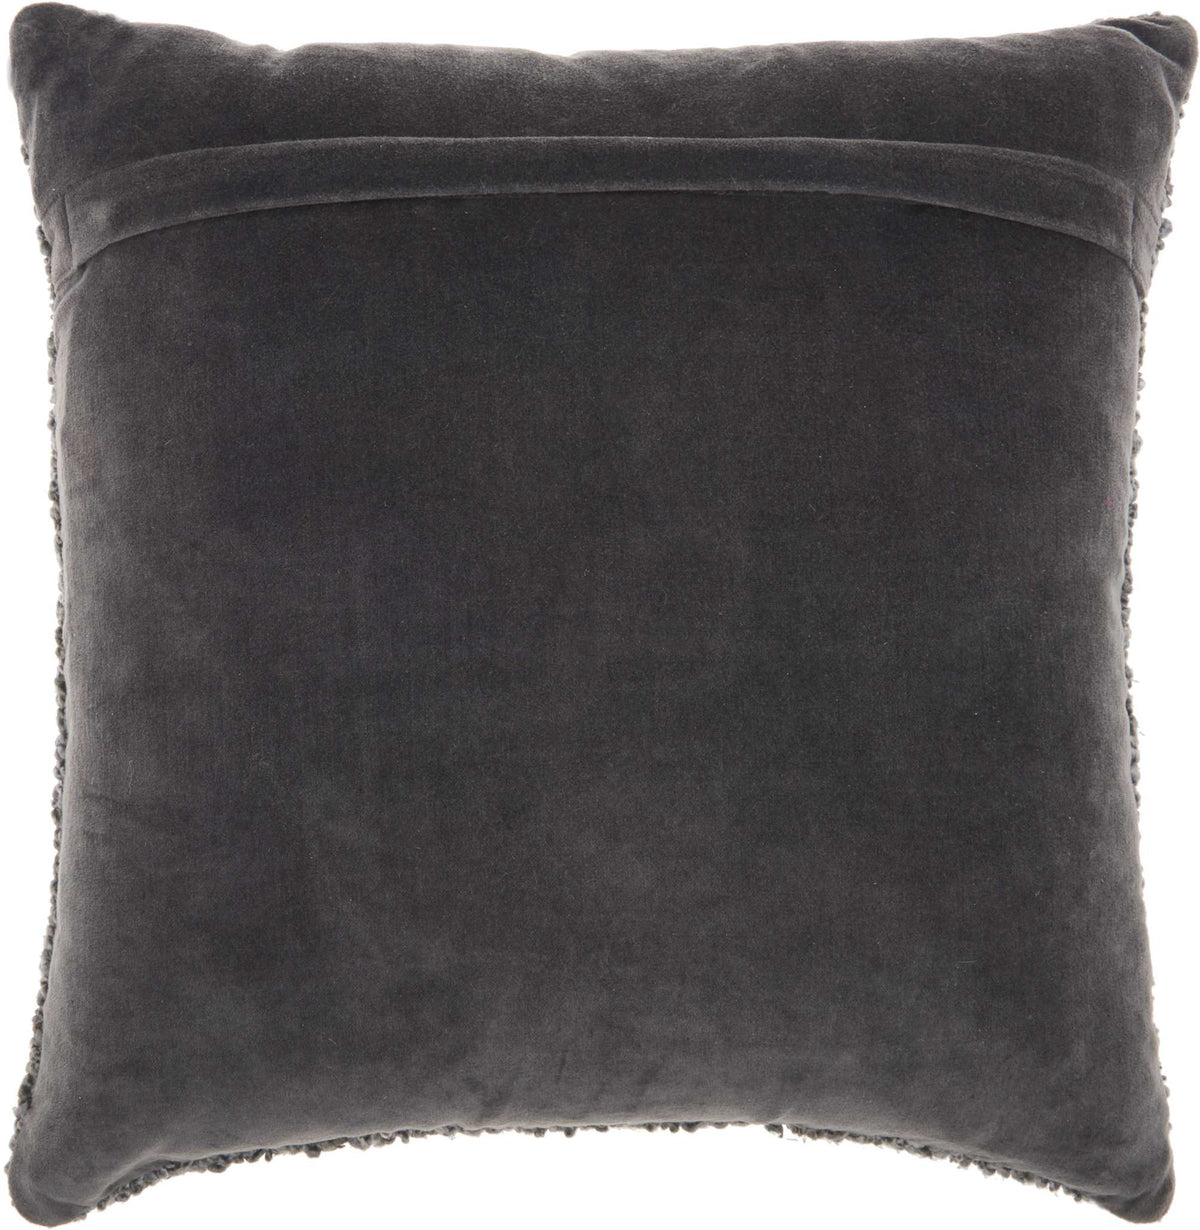 Zosia 18" x 18" Charcoal Throw Pillow - Elegance Collection